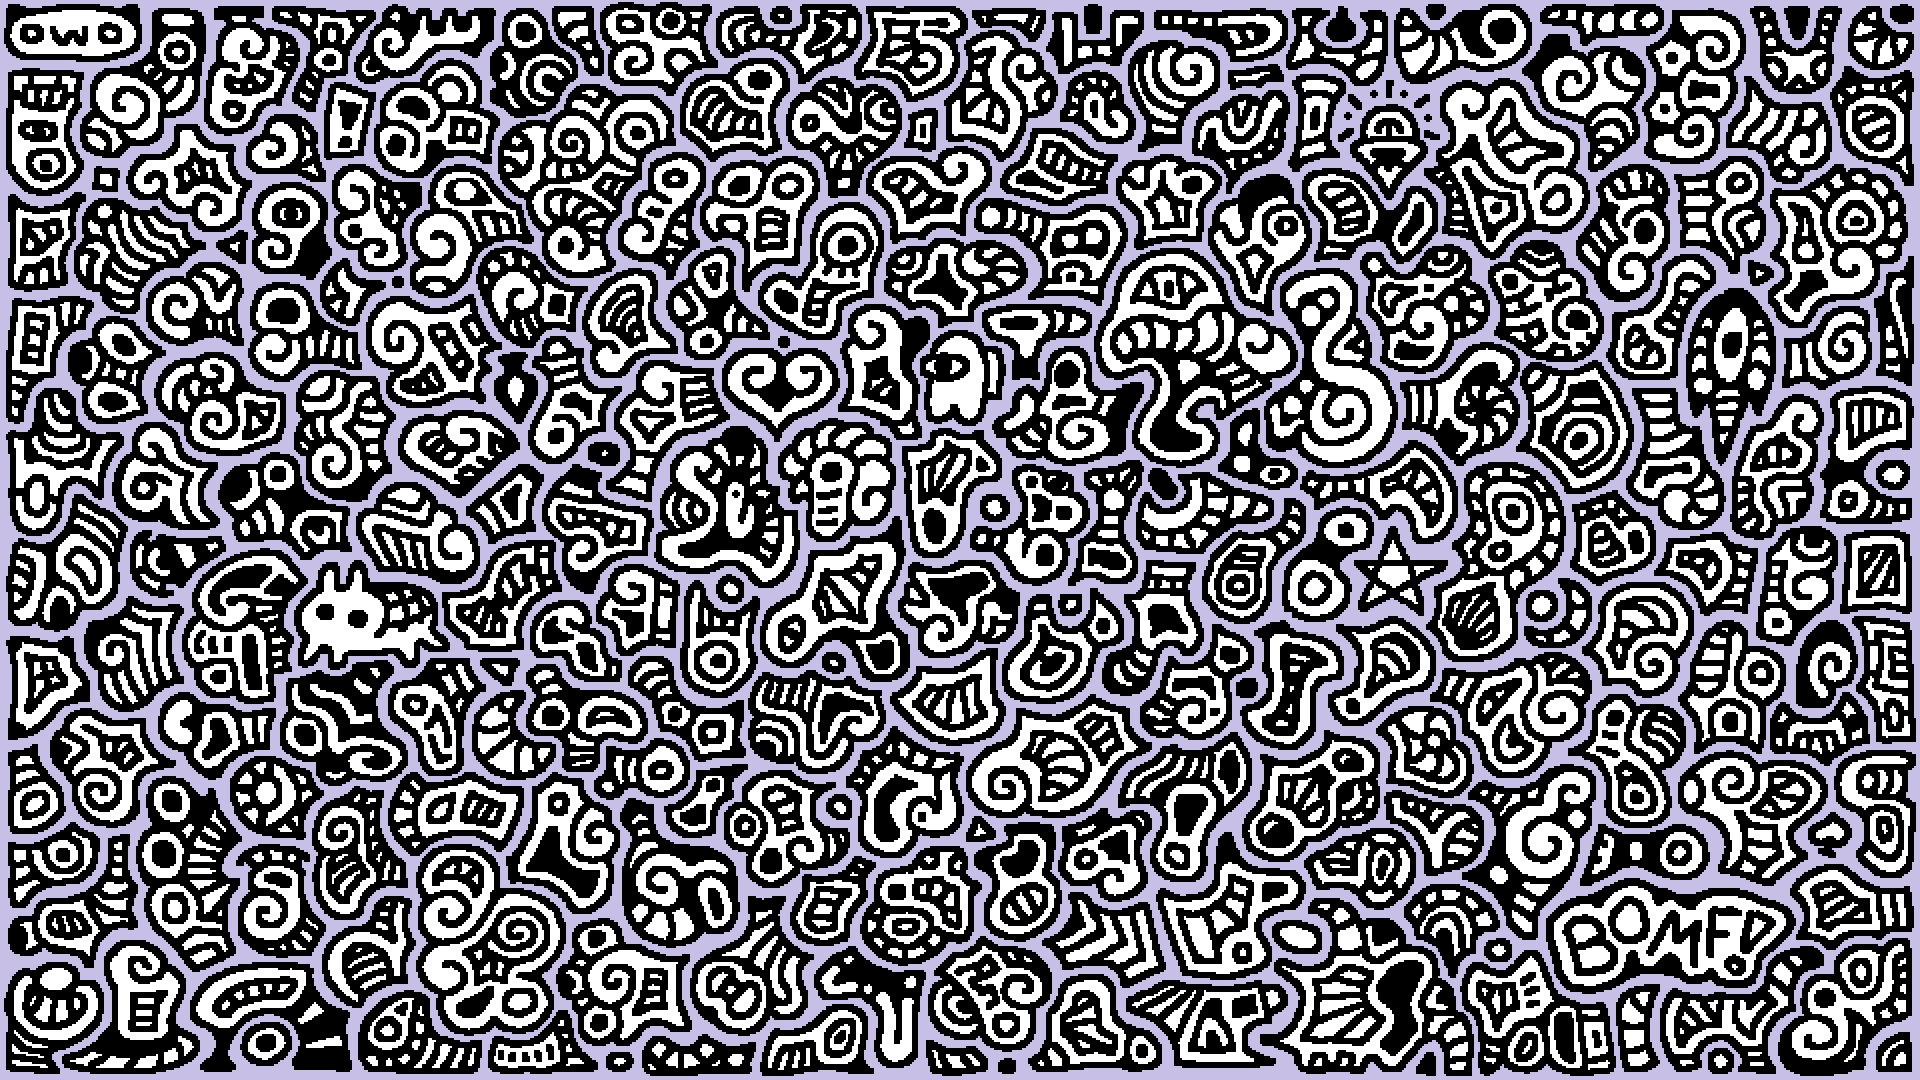 mspaint drawing of abstract doodles filling a space